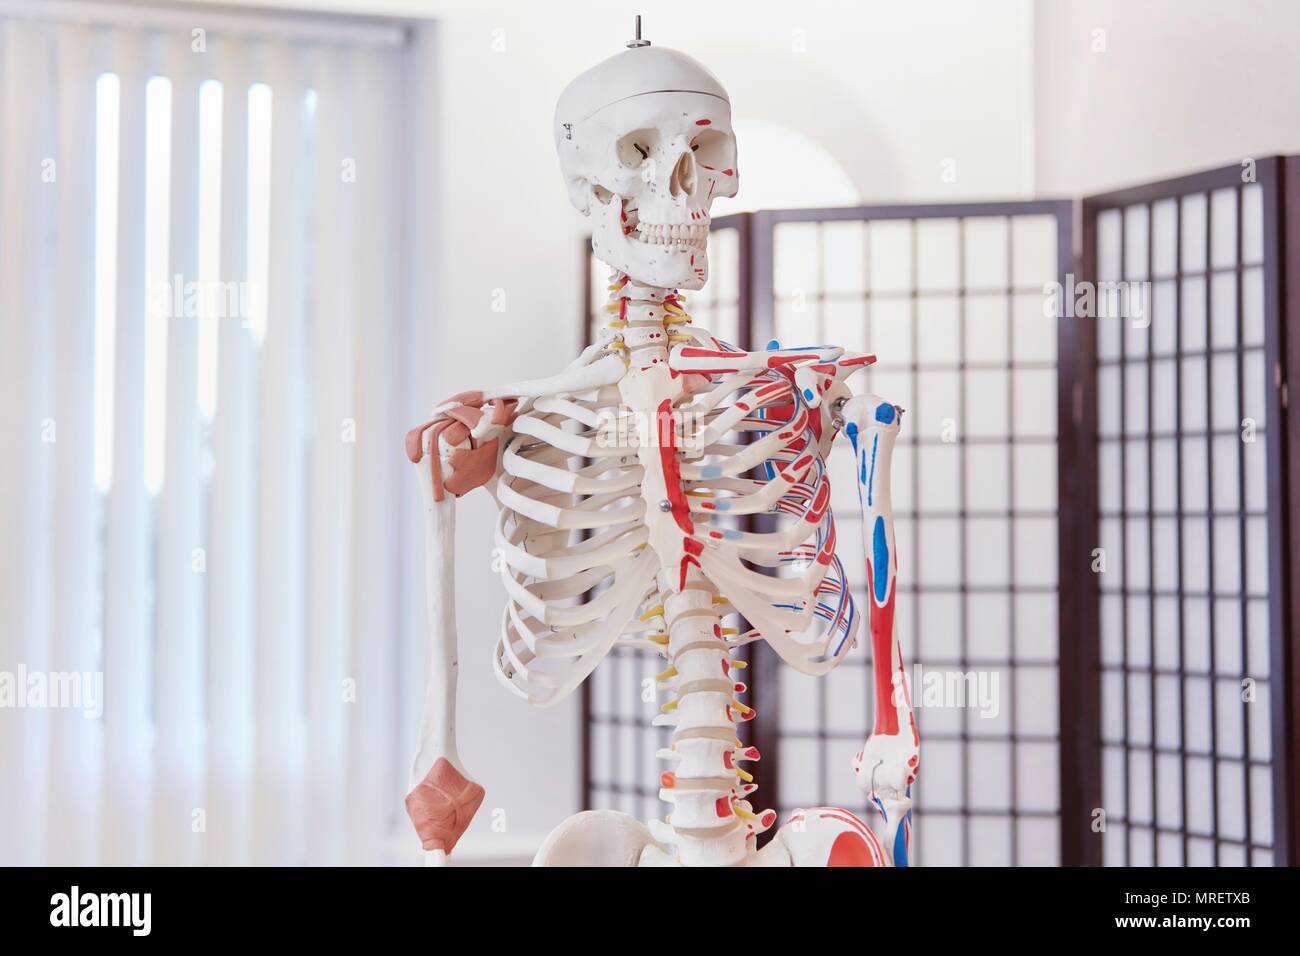 Model of human skeleton used in osteopathy. Stock Photo